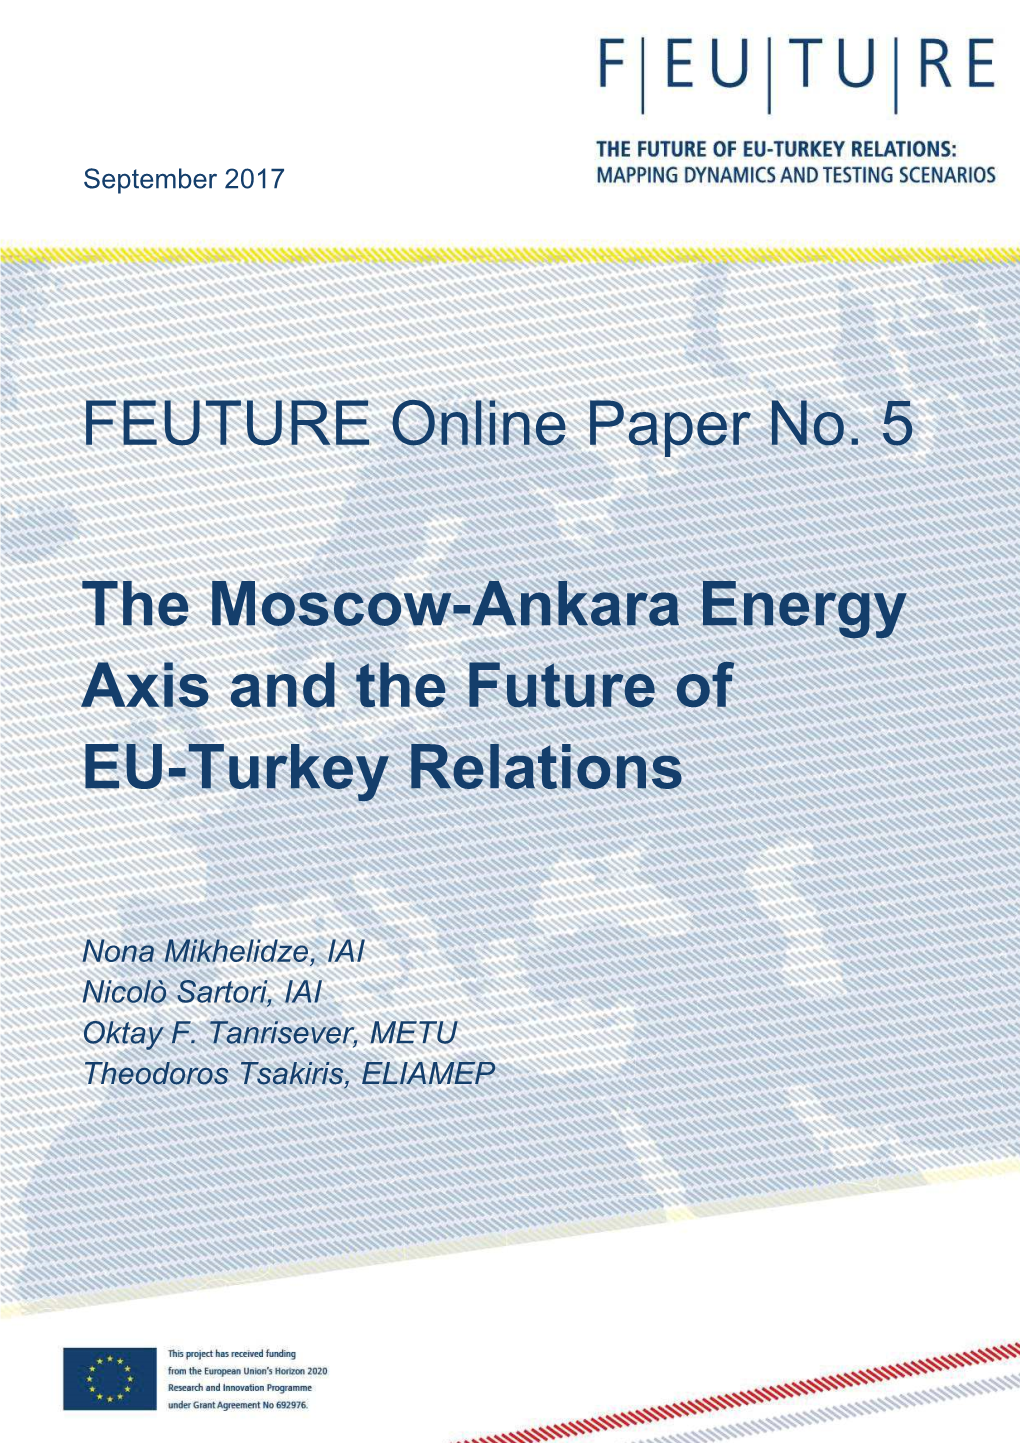 The Moscow-Ankara Energy Axis and the Future of EU-Turkey Relations